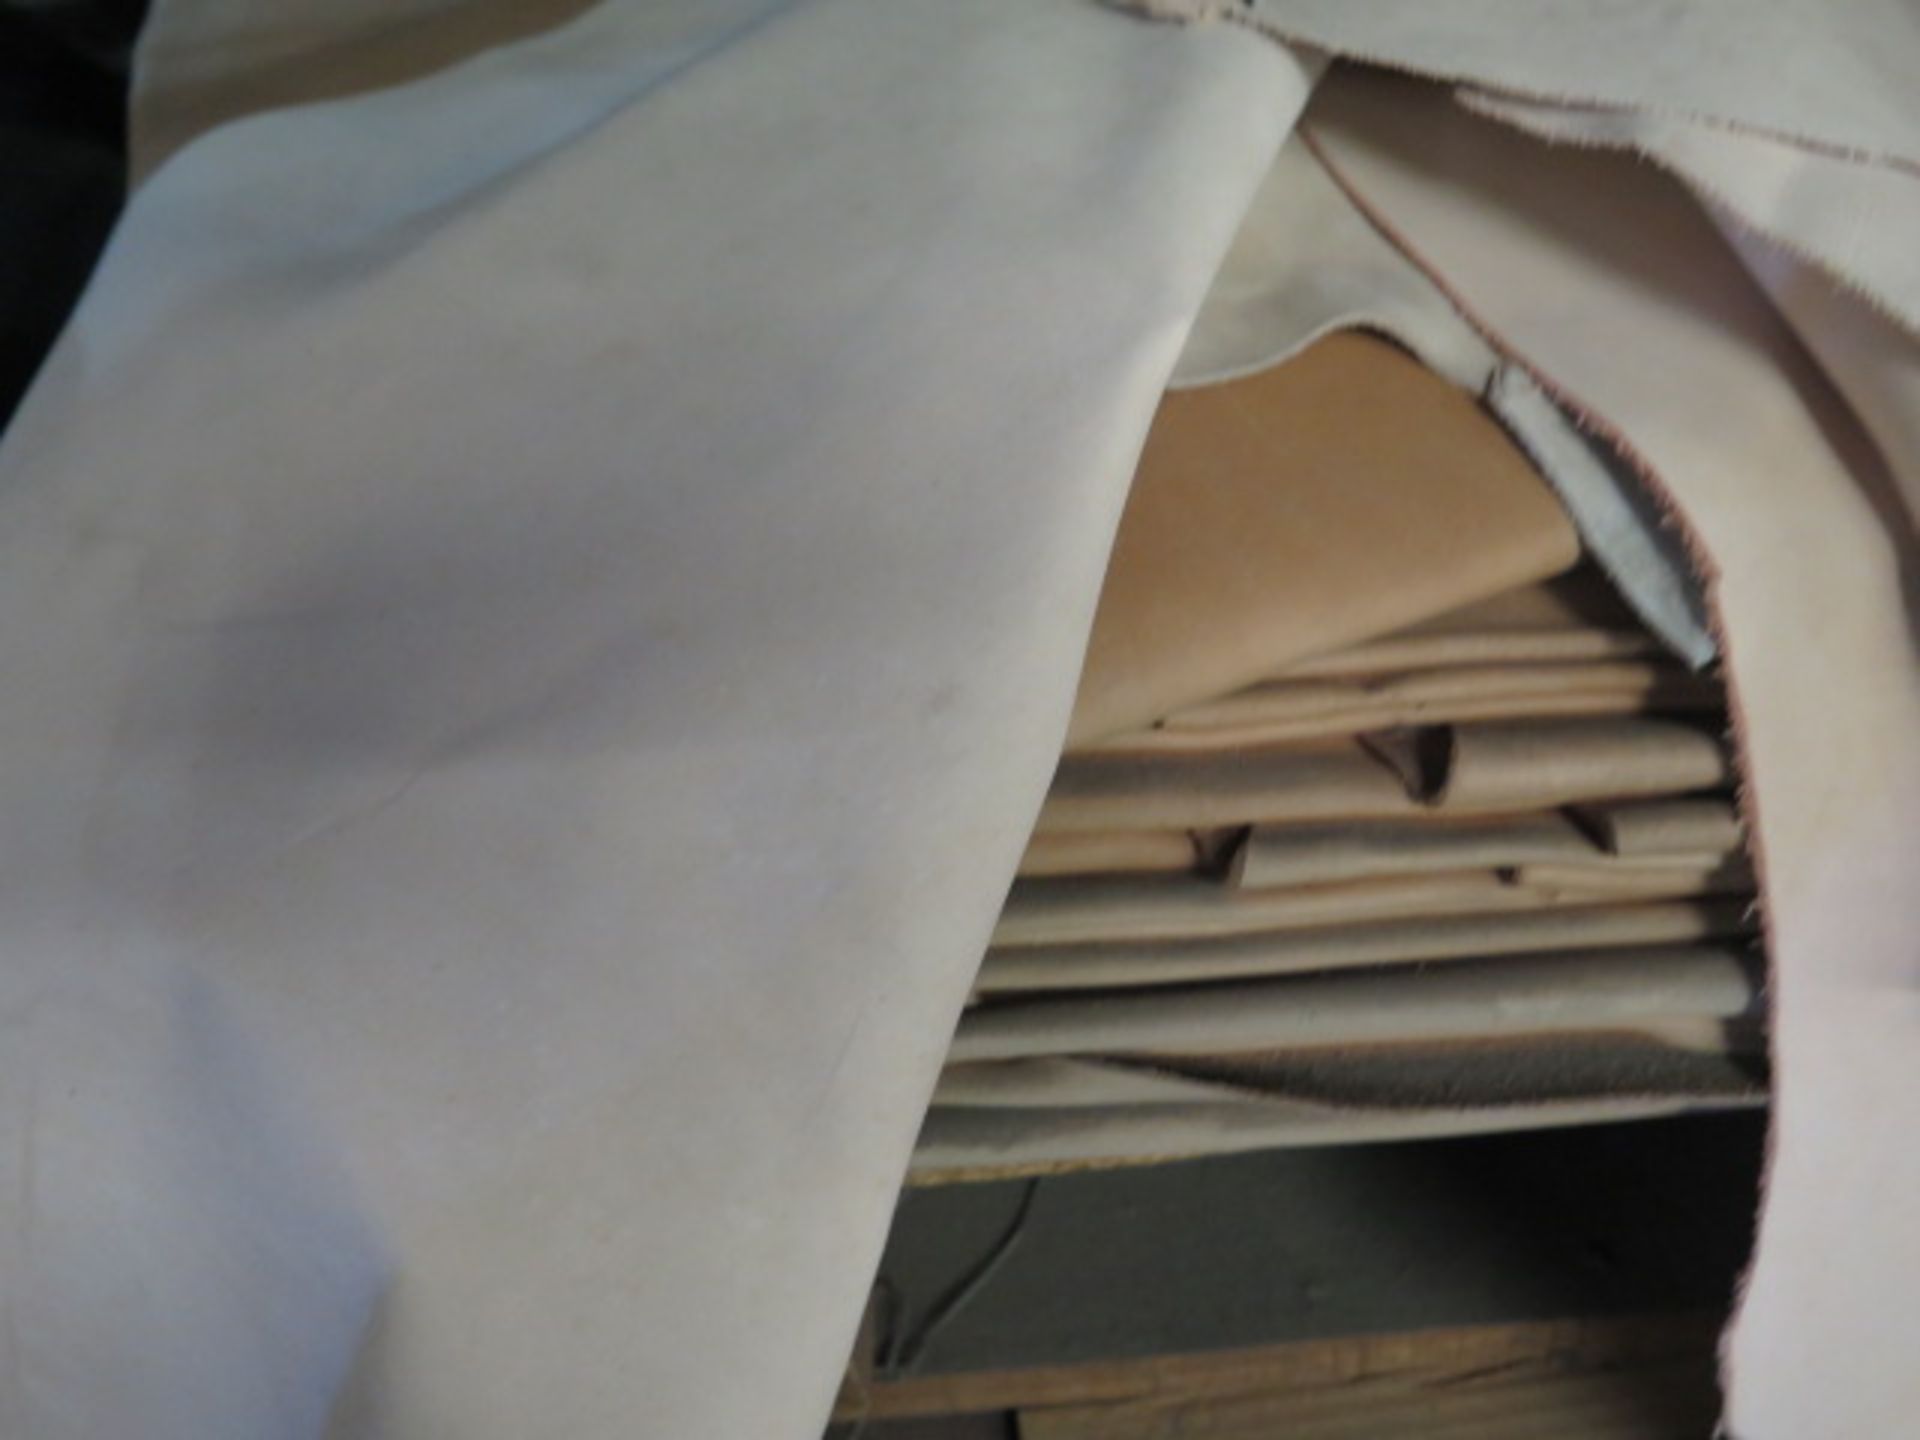 Leather Furniture Grade, 1.2mm-1.4mm, Beige, 4500 Sq/Ft, Hides (SOLD AS-IS - NO WARRANTY) - Image 5 of 11